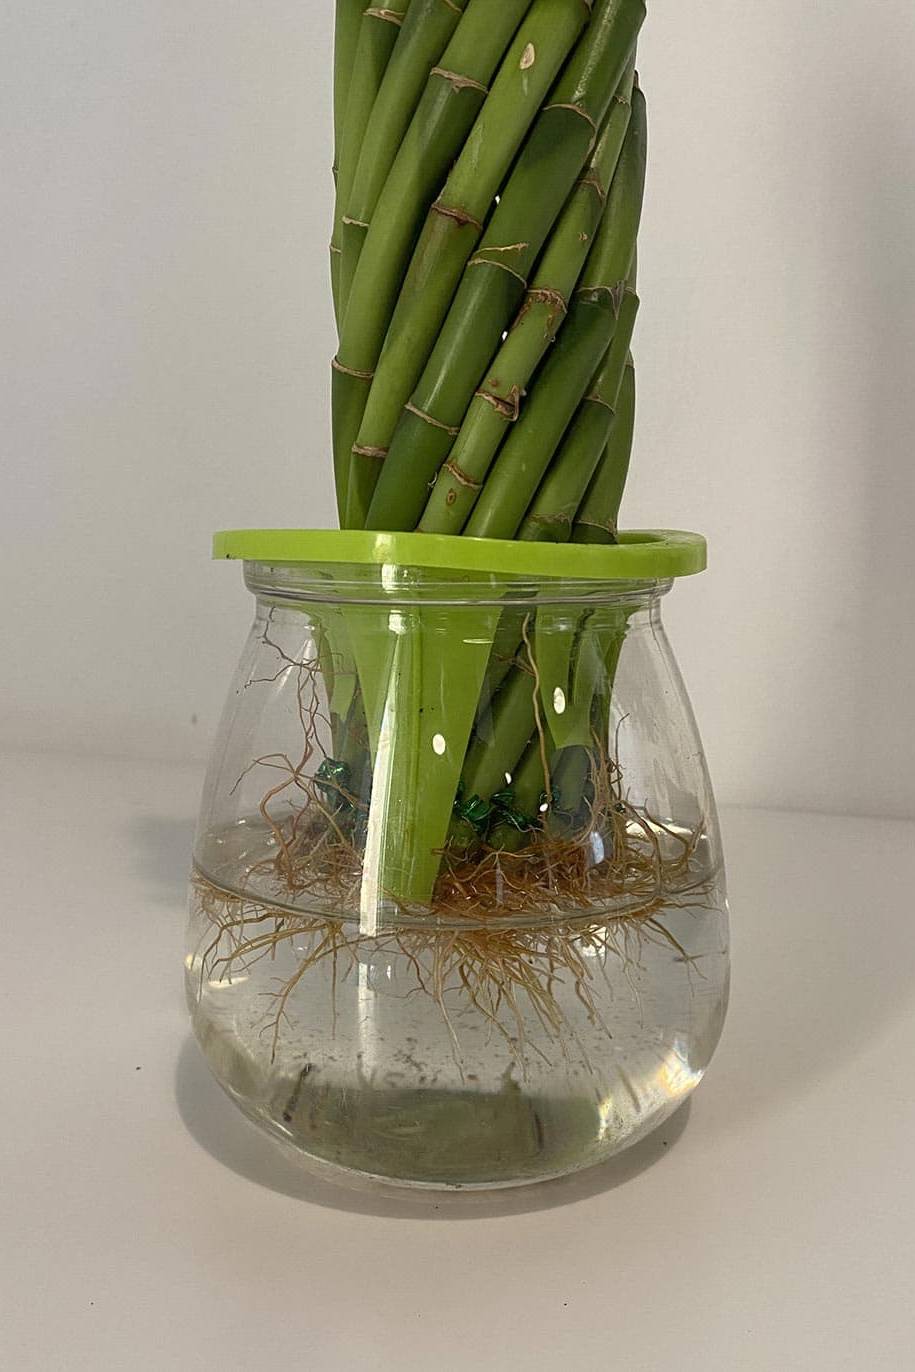 Twisted Lucky Bamboo Self Watering